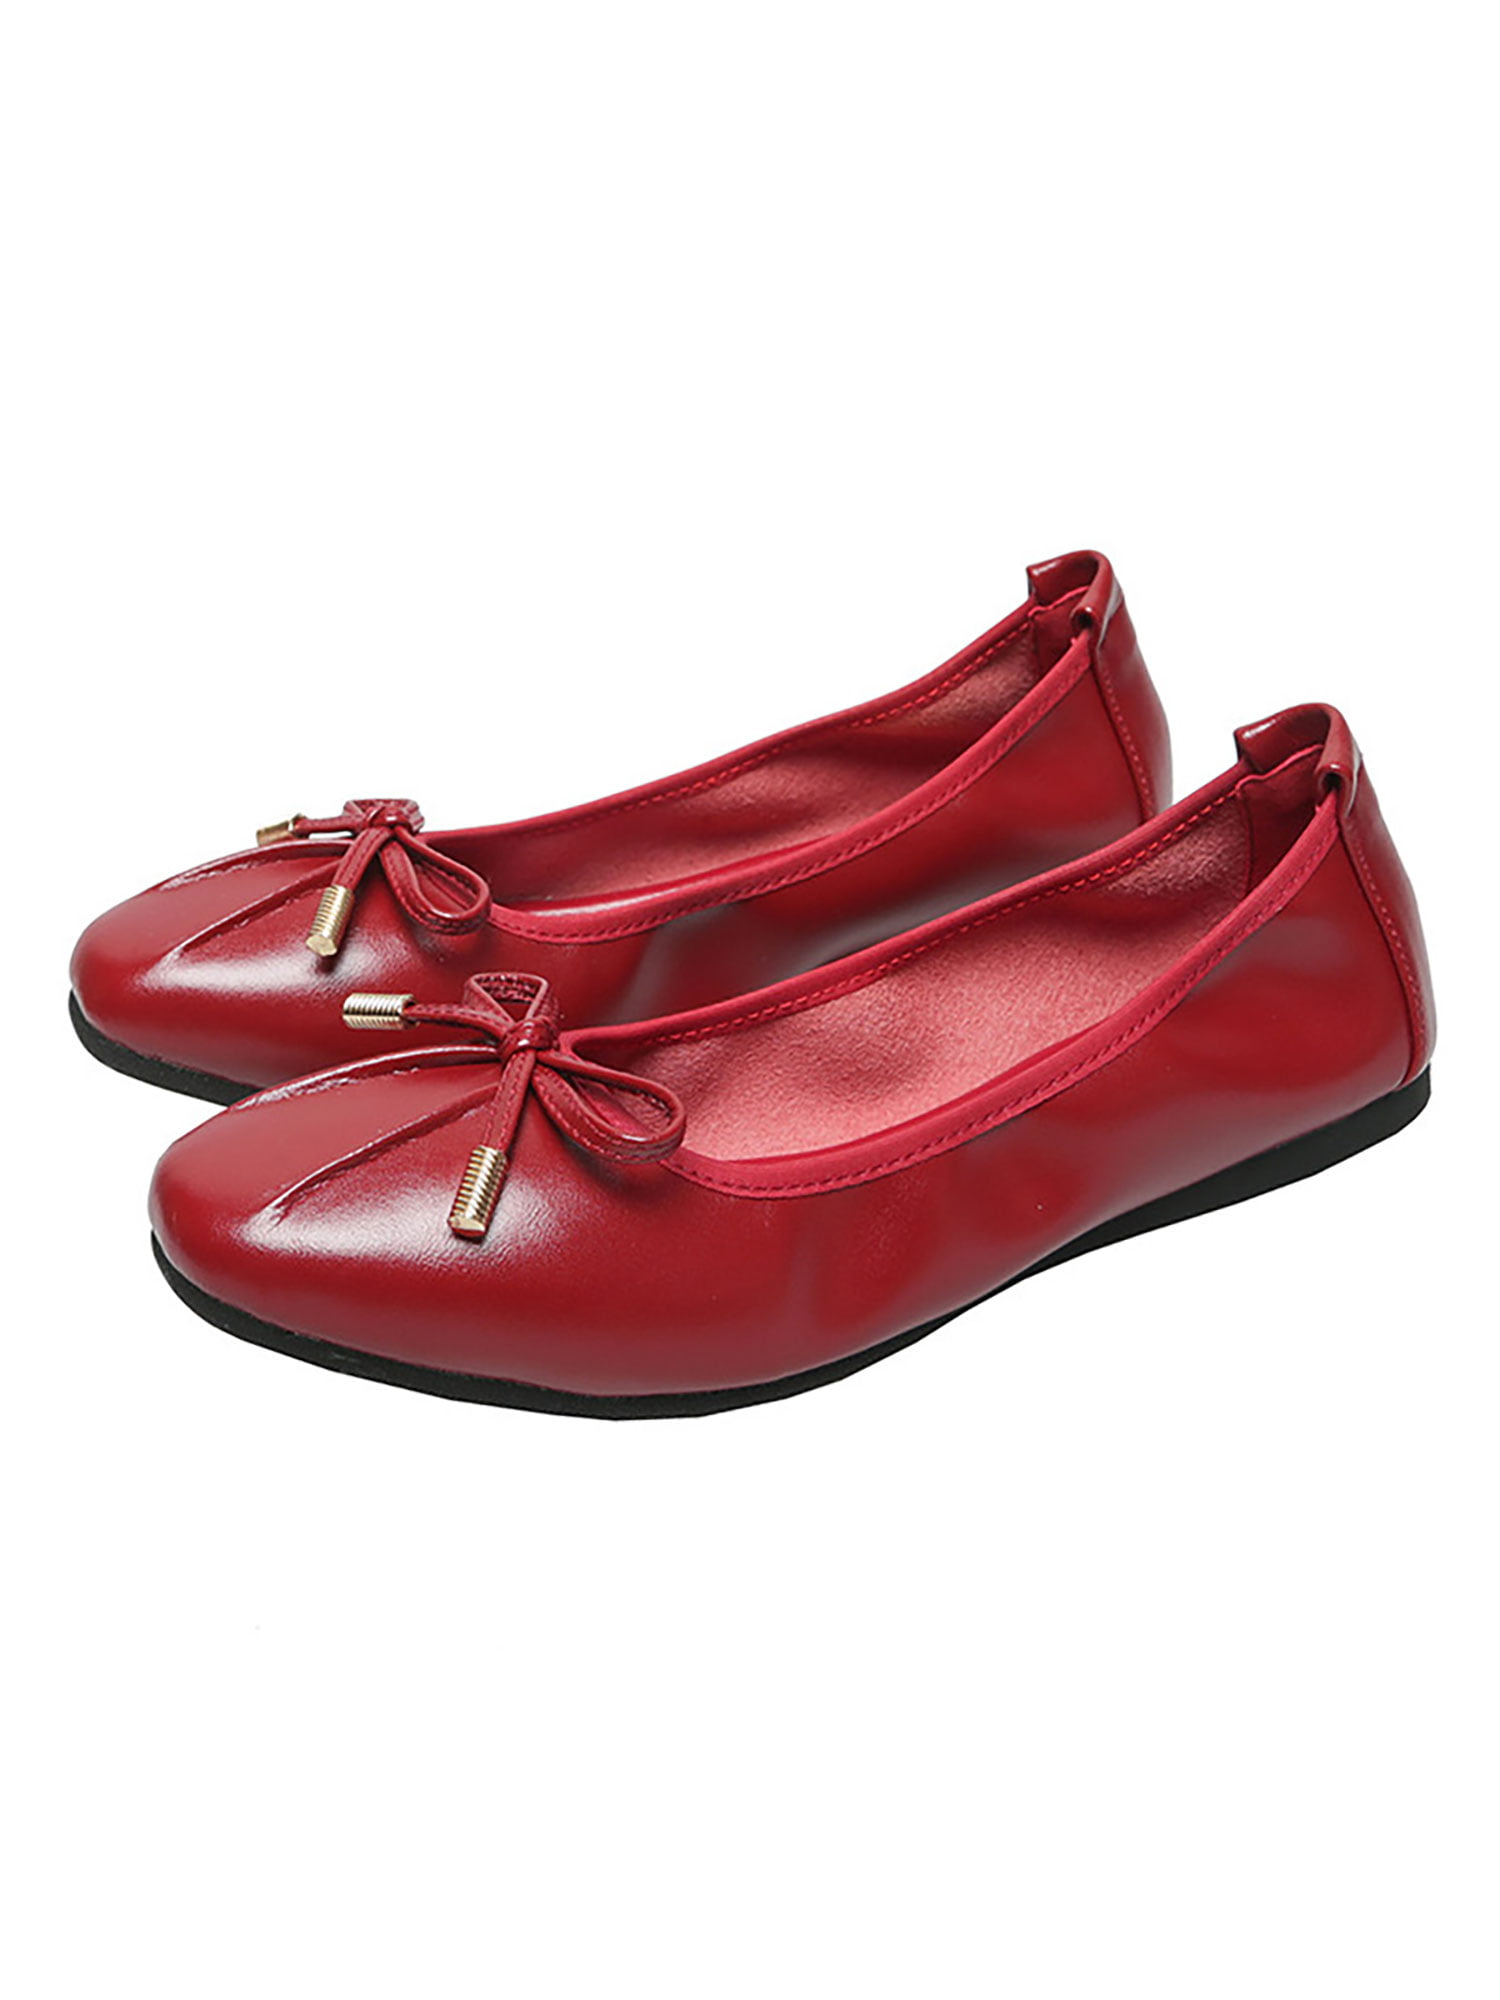 sweet Womens Round Toe Loafers Ballet Flats Slip on bowknot Casual Shoes 